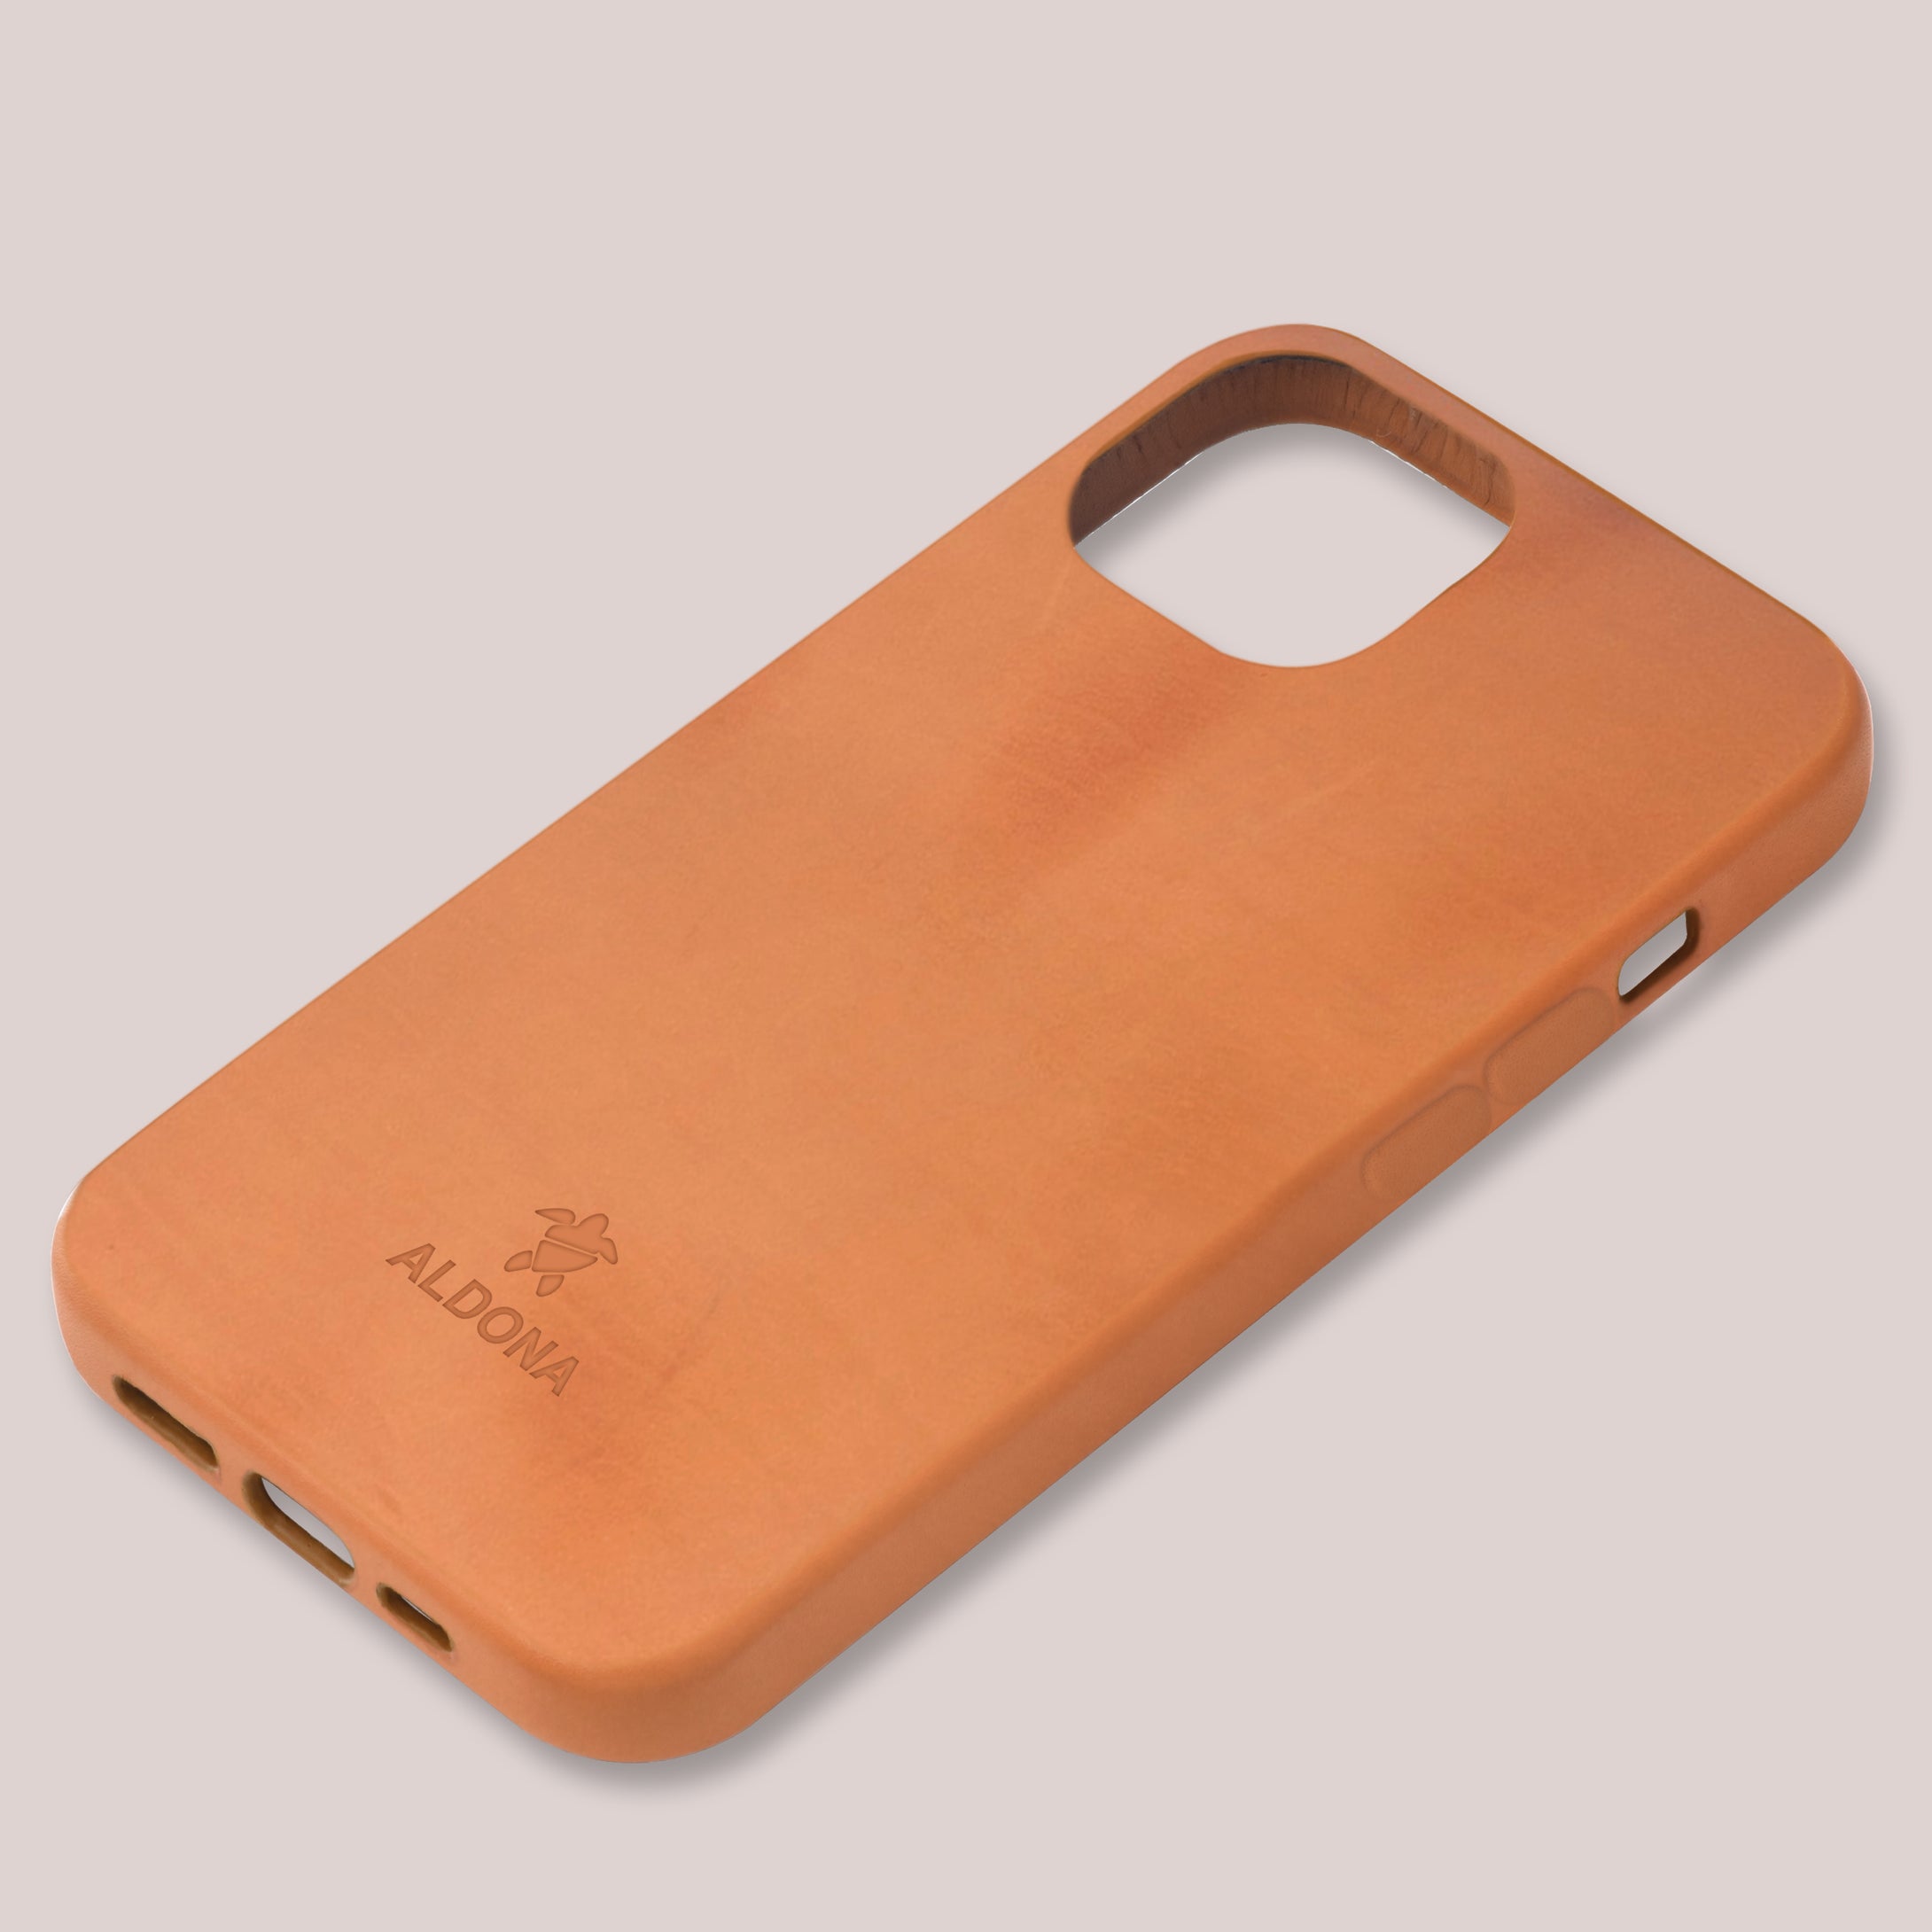 Kalon Case for iPhone 12 with MagSafe Compatibility